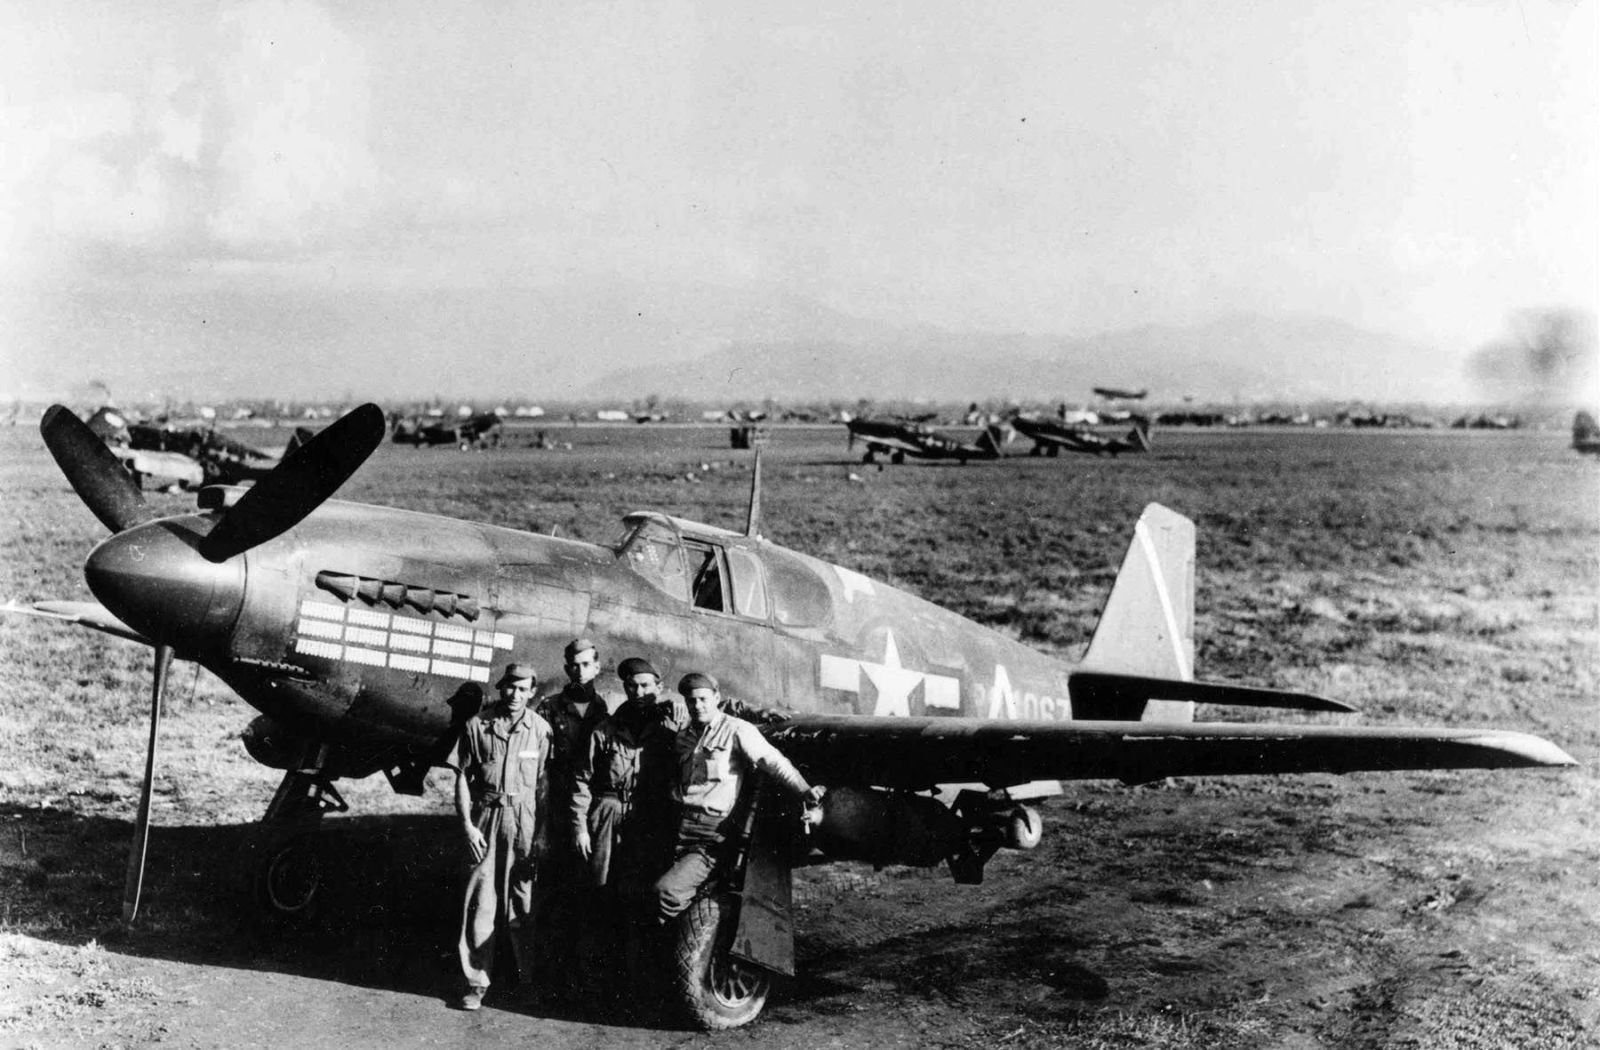 A-36 of the 86th Bombardment Group (Dive), “284067&quot; coded A, lost to flak, 14 January 1944